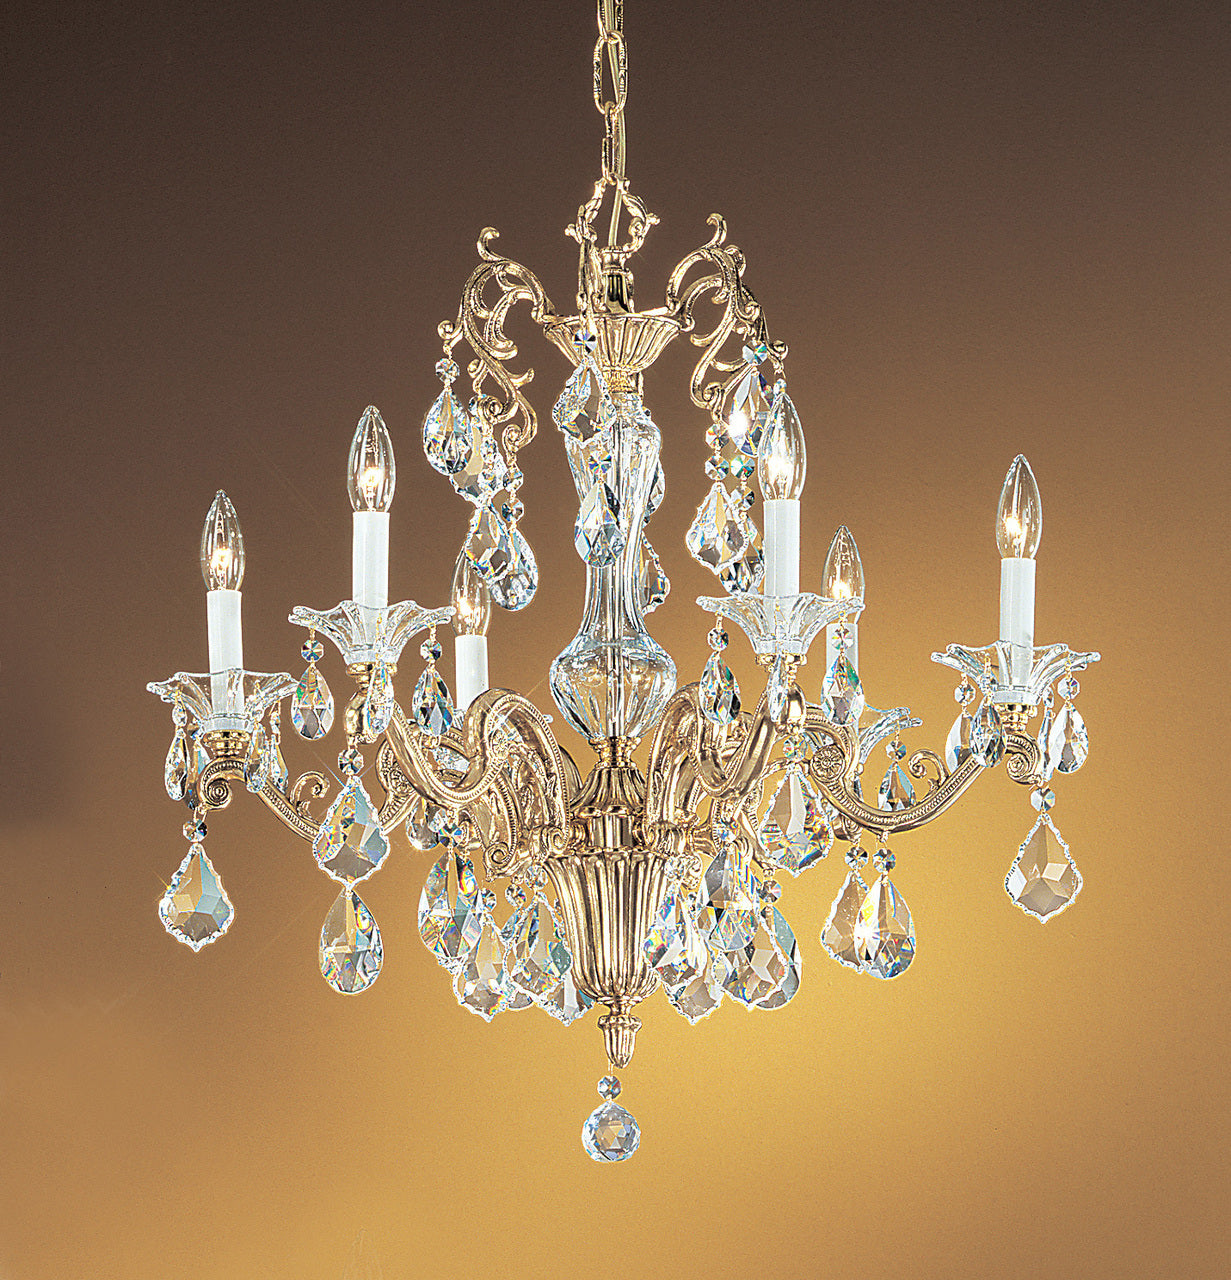 Classic Lighting 57106 BBK CSA Via Firenze Crystal Chandelier in Bronze/Black Patina (Imported from Spain)